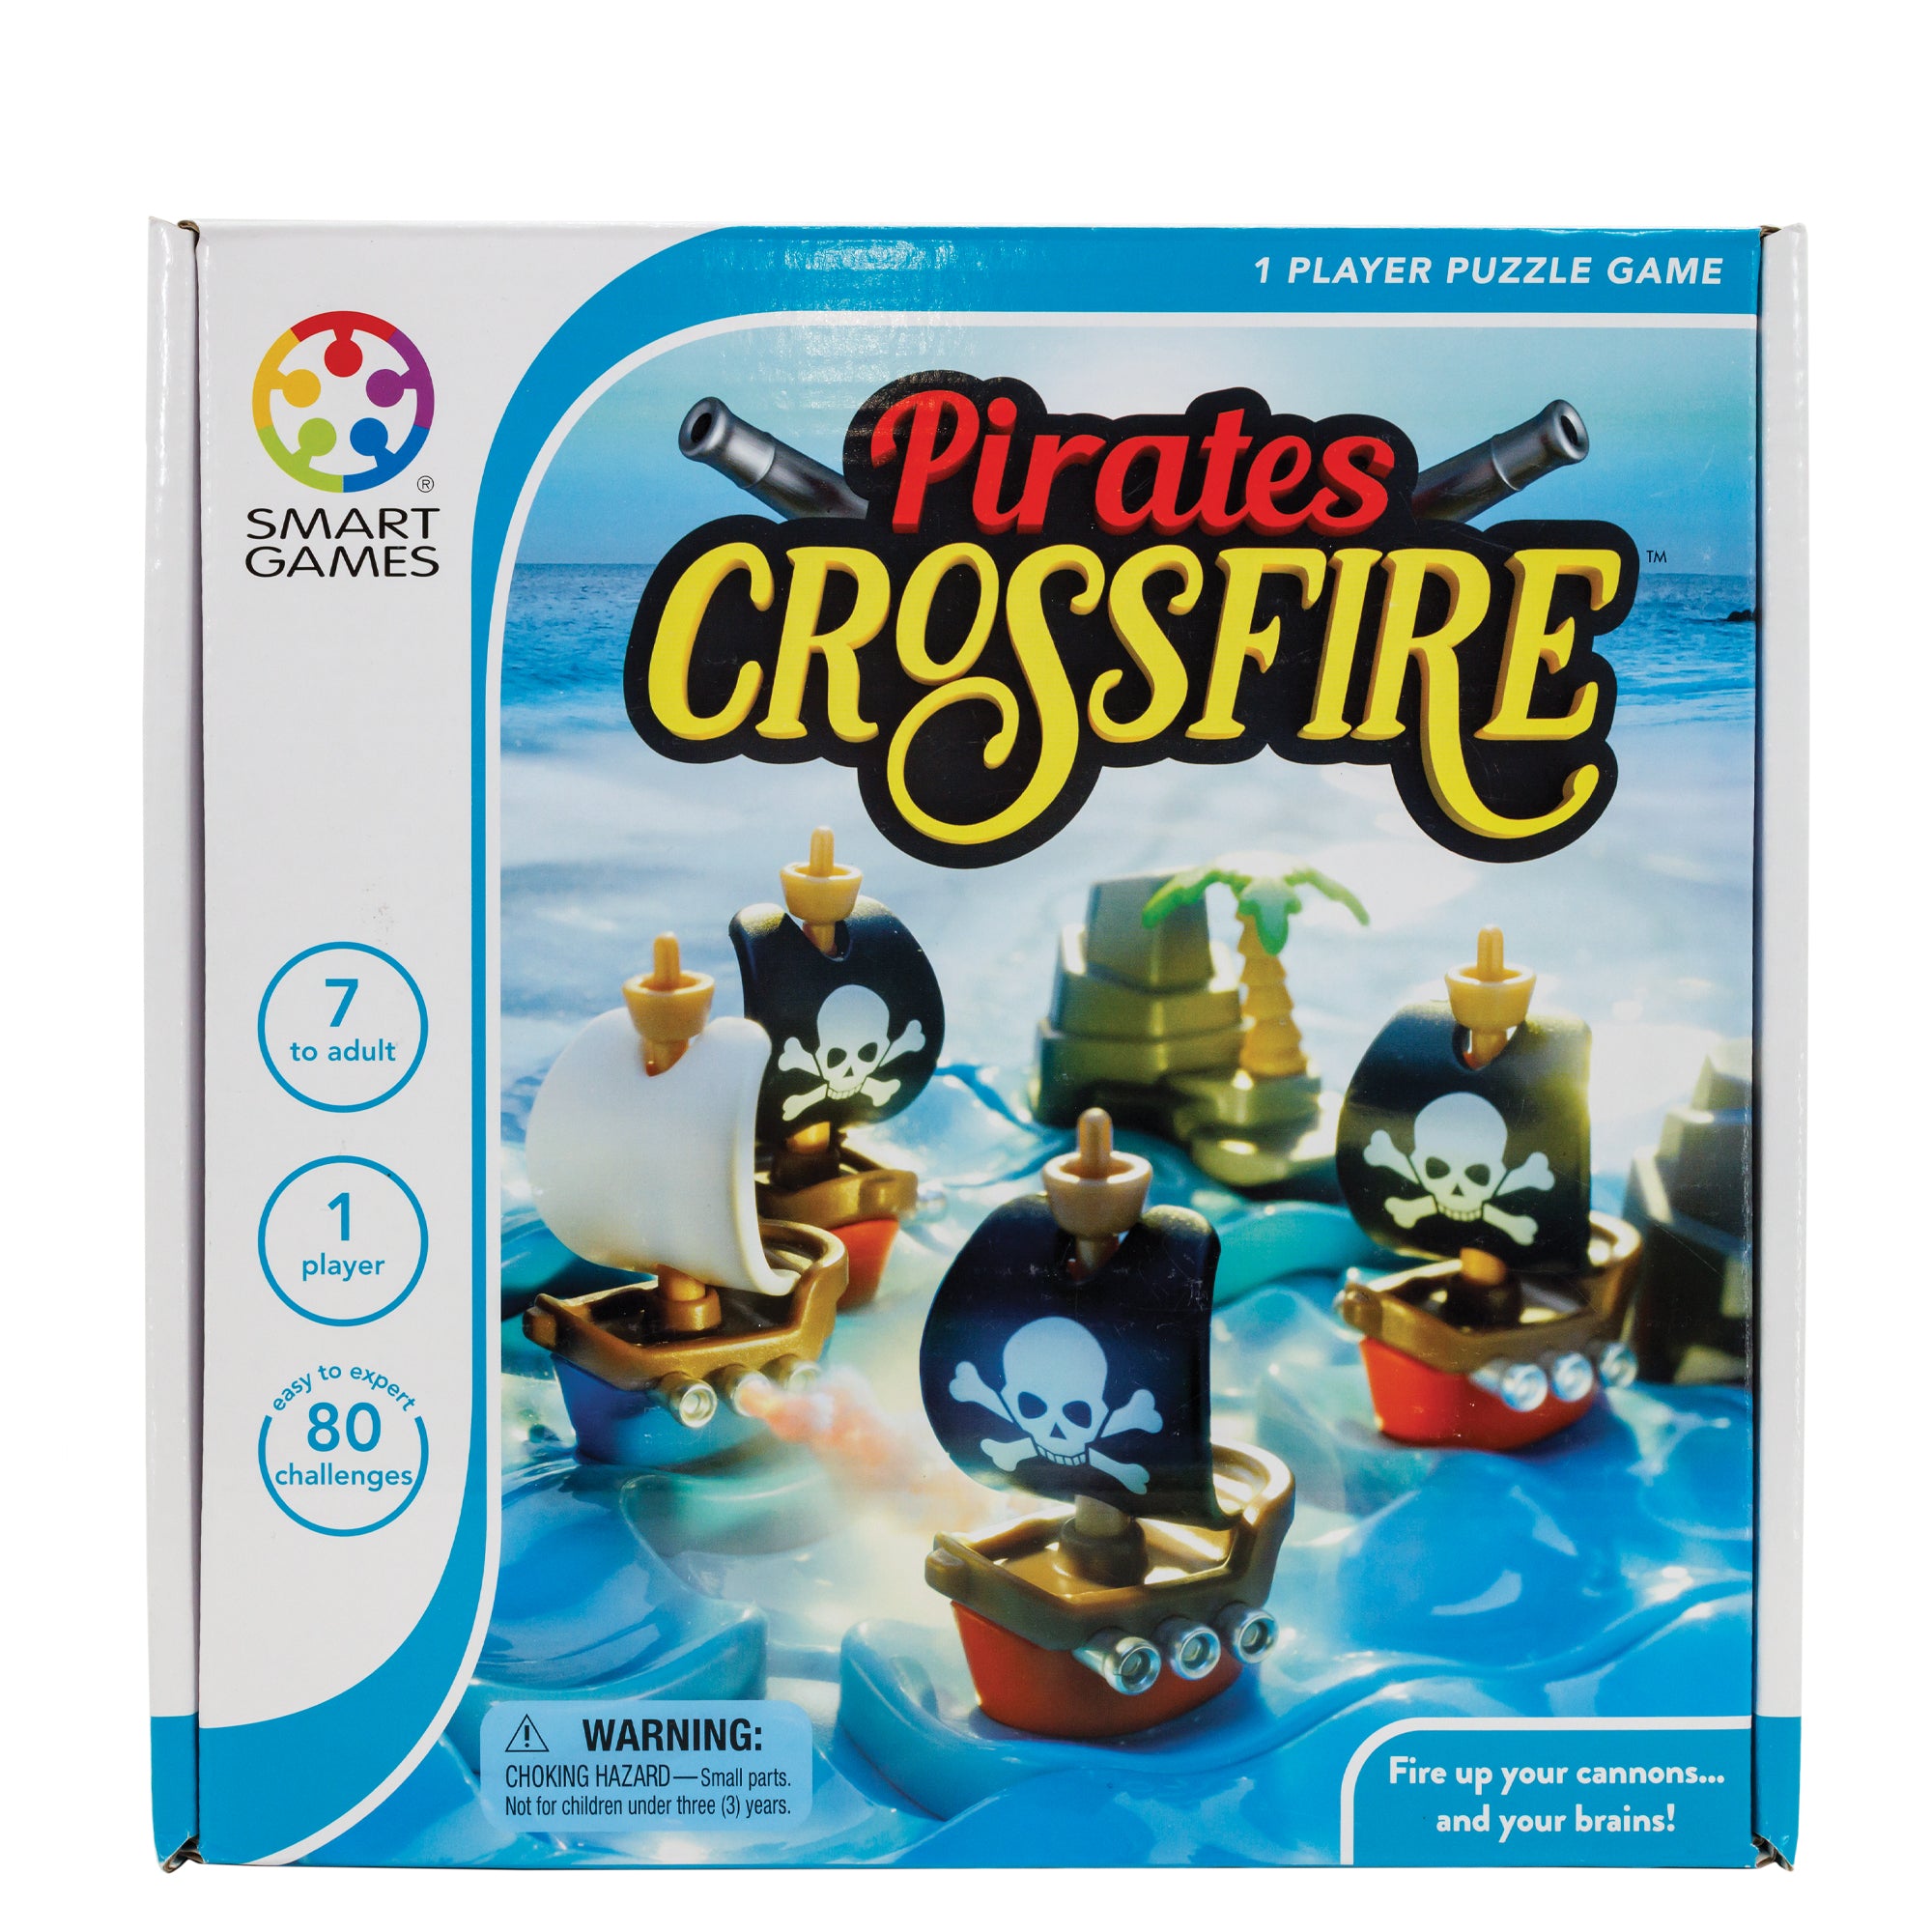 The Pirates Crossfire game box. On the cover is the blue game board with ship and rock pieces placed on top. There are 3 ships with black sails with white skulls, 1 ship with white sails, and 2 rock pieces. You can see the ocean in the background. The left of the box indicated that it is a 1 player game, it’s recommended for age 7 and above, and there are 80 challenges.